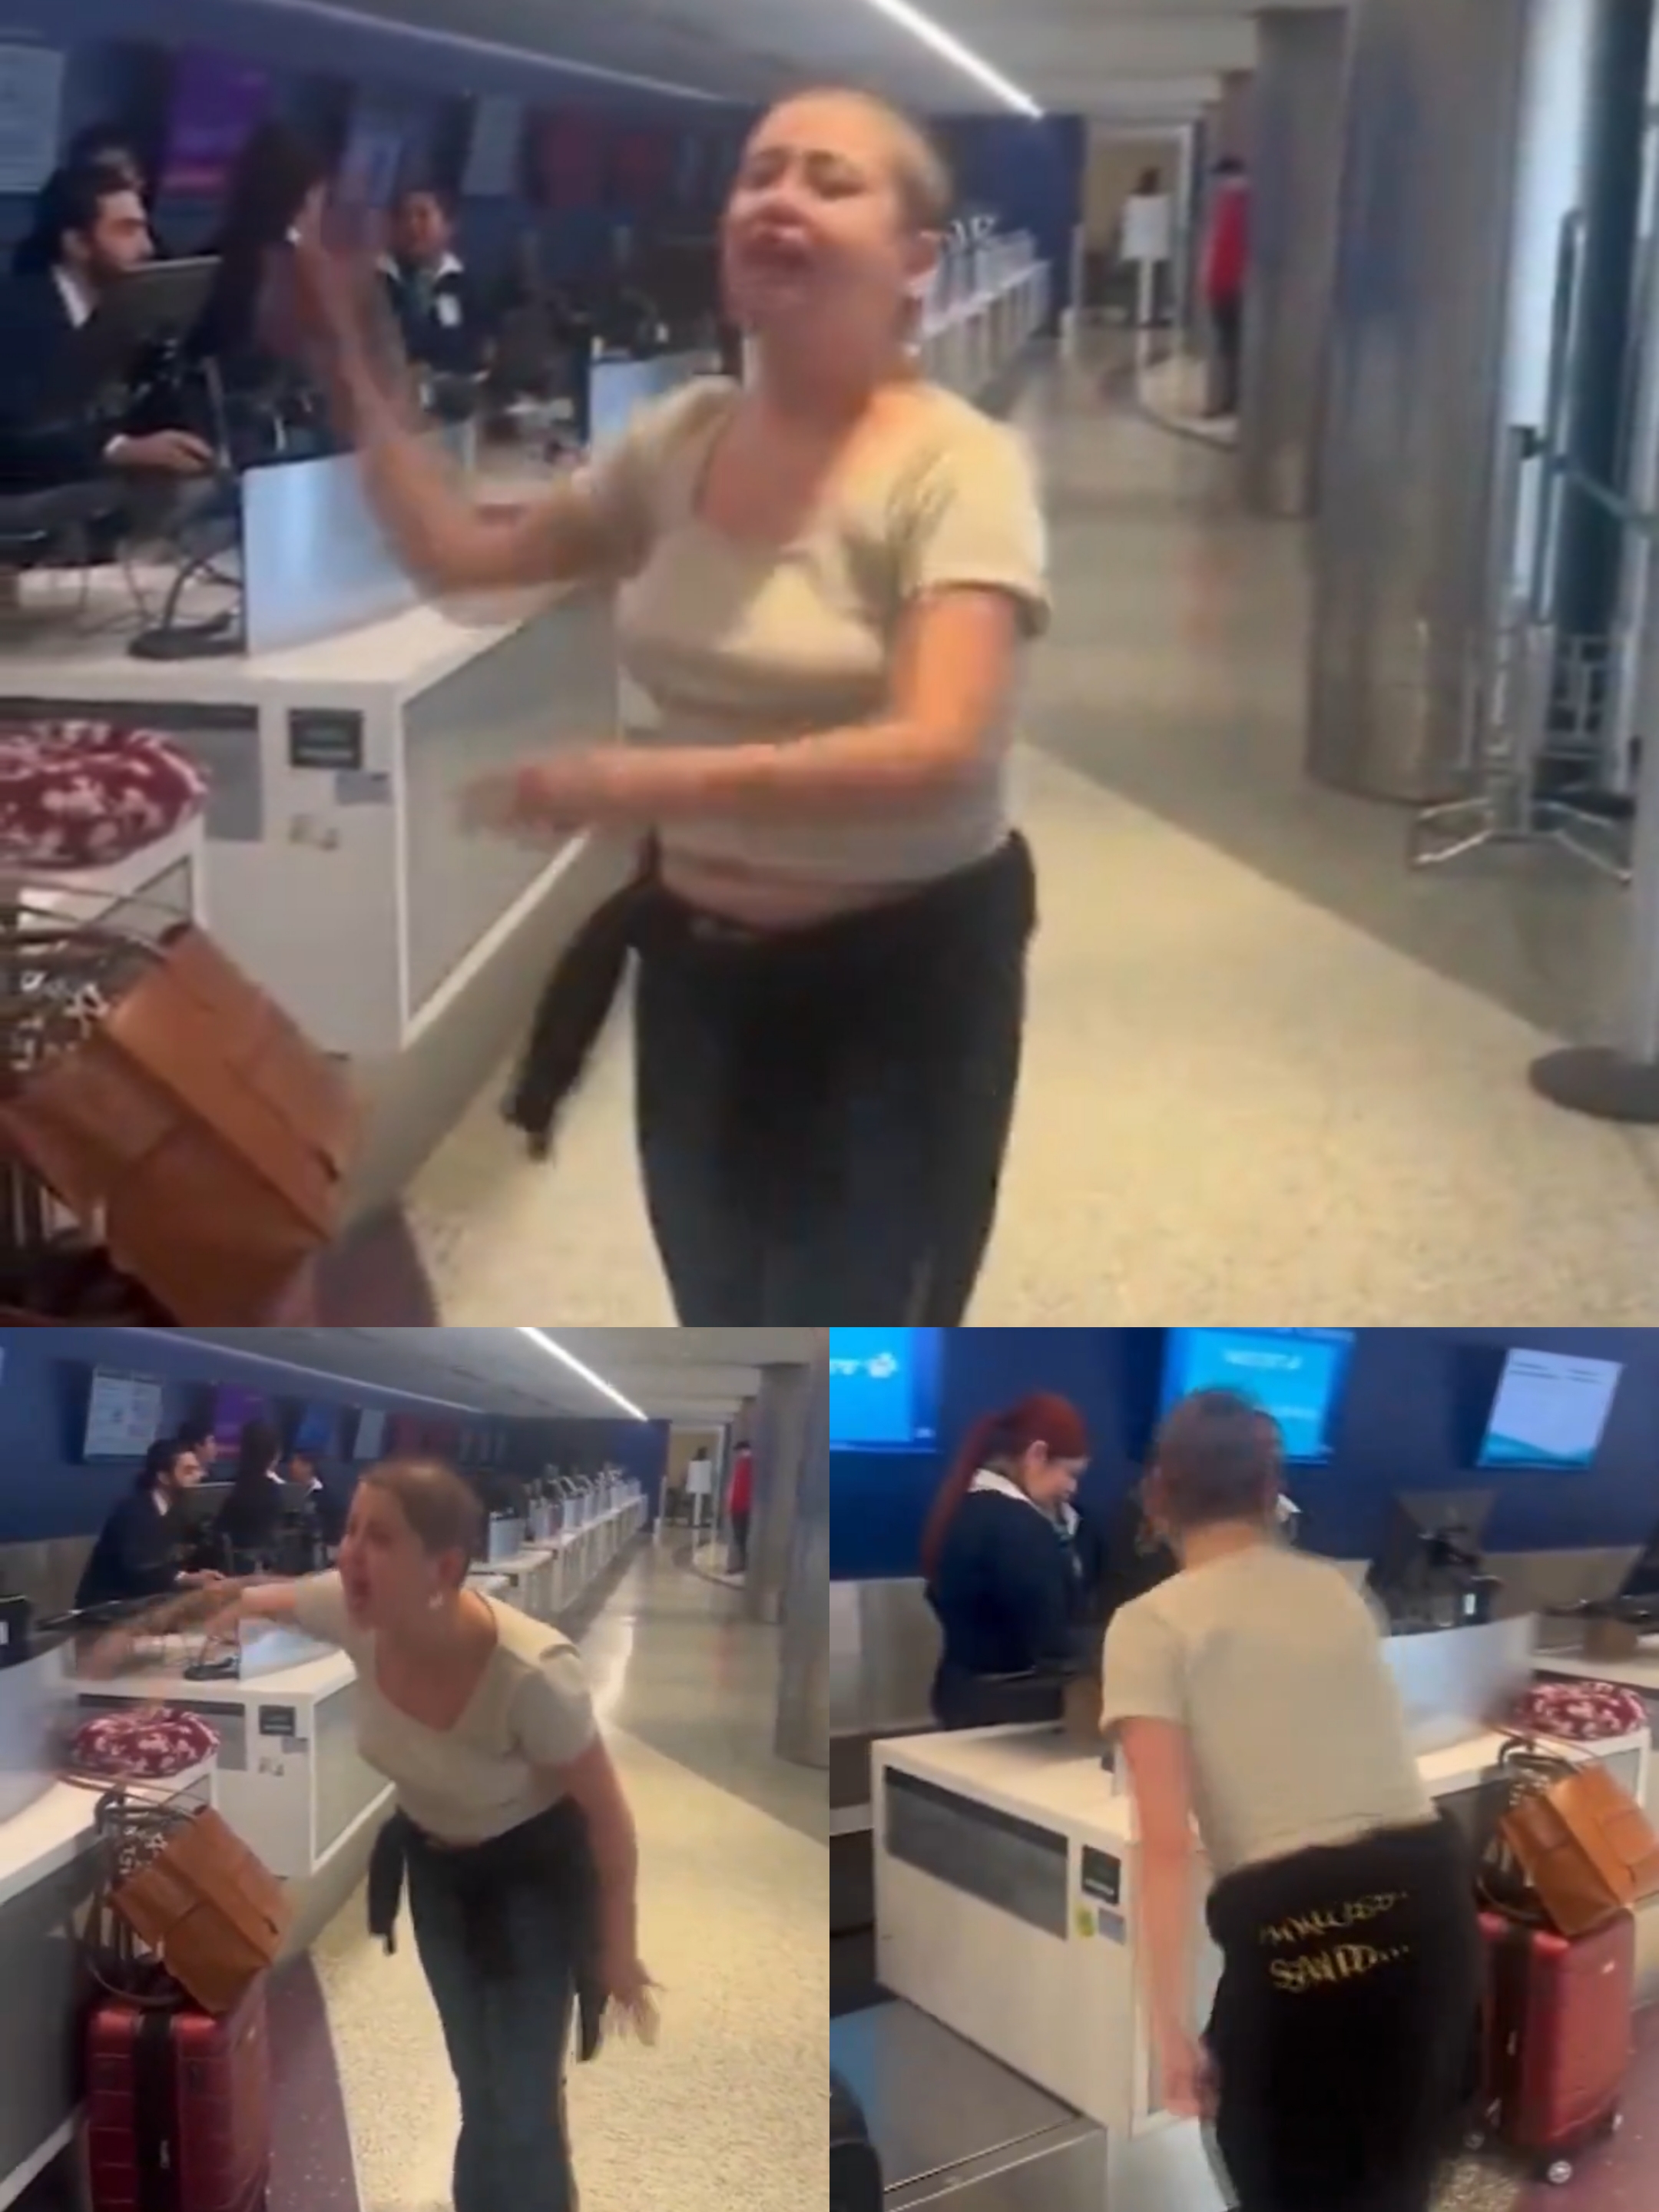 Woman's Profanity-Laced Meltdown at LAX Turns Embarrassing Fiasco